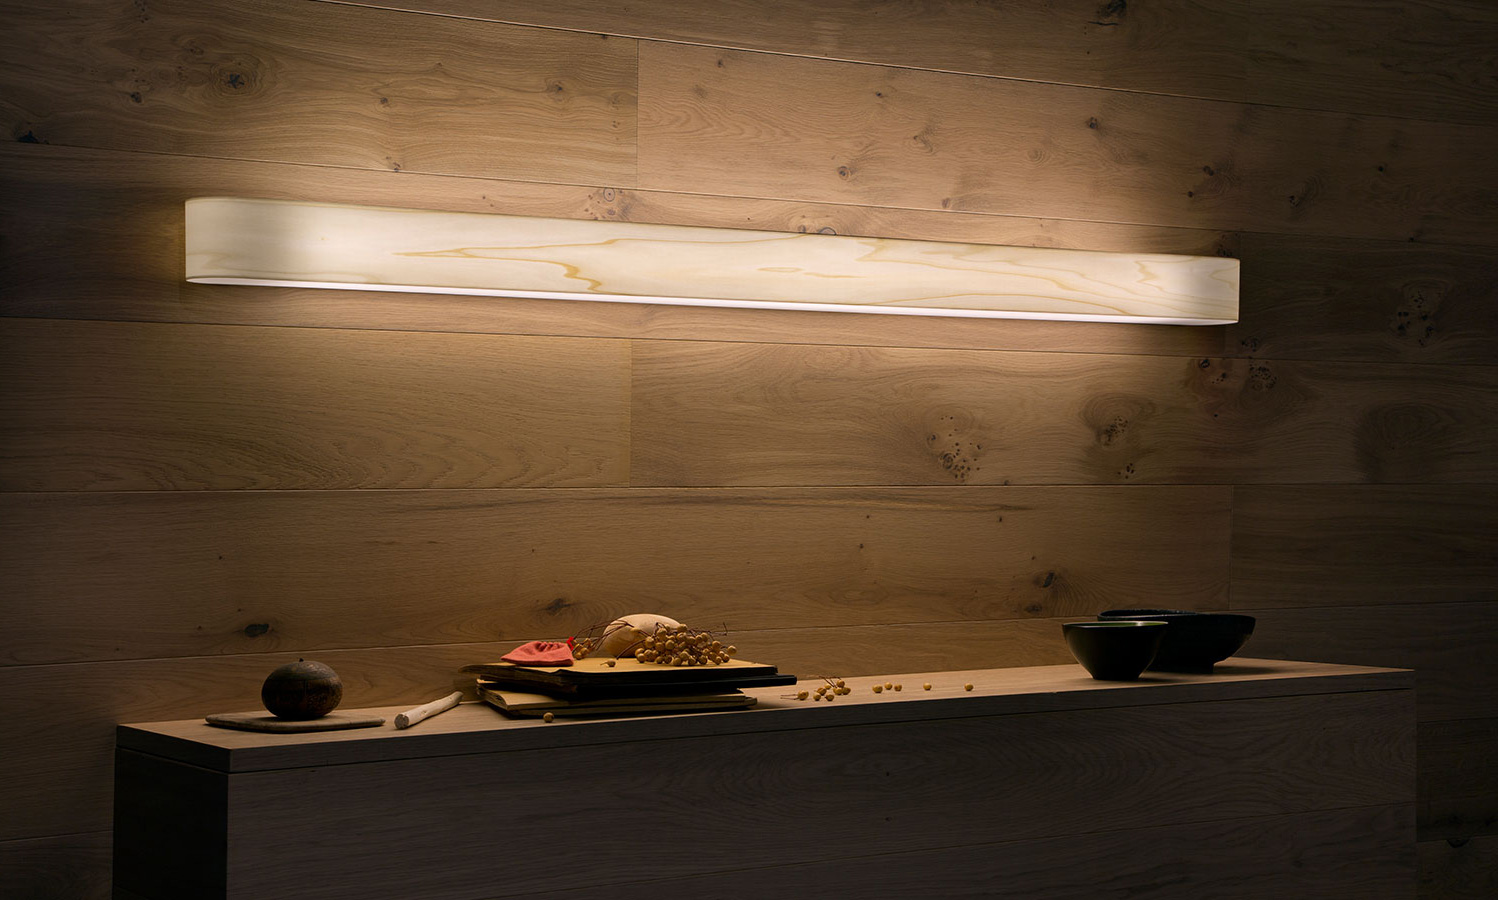 LZF Lamps | I-Club, Slim Wall Lamp. Organic space | Wood touched by Light | Handmade Wood Lighting since 1994